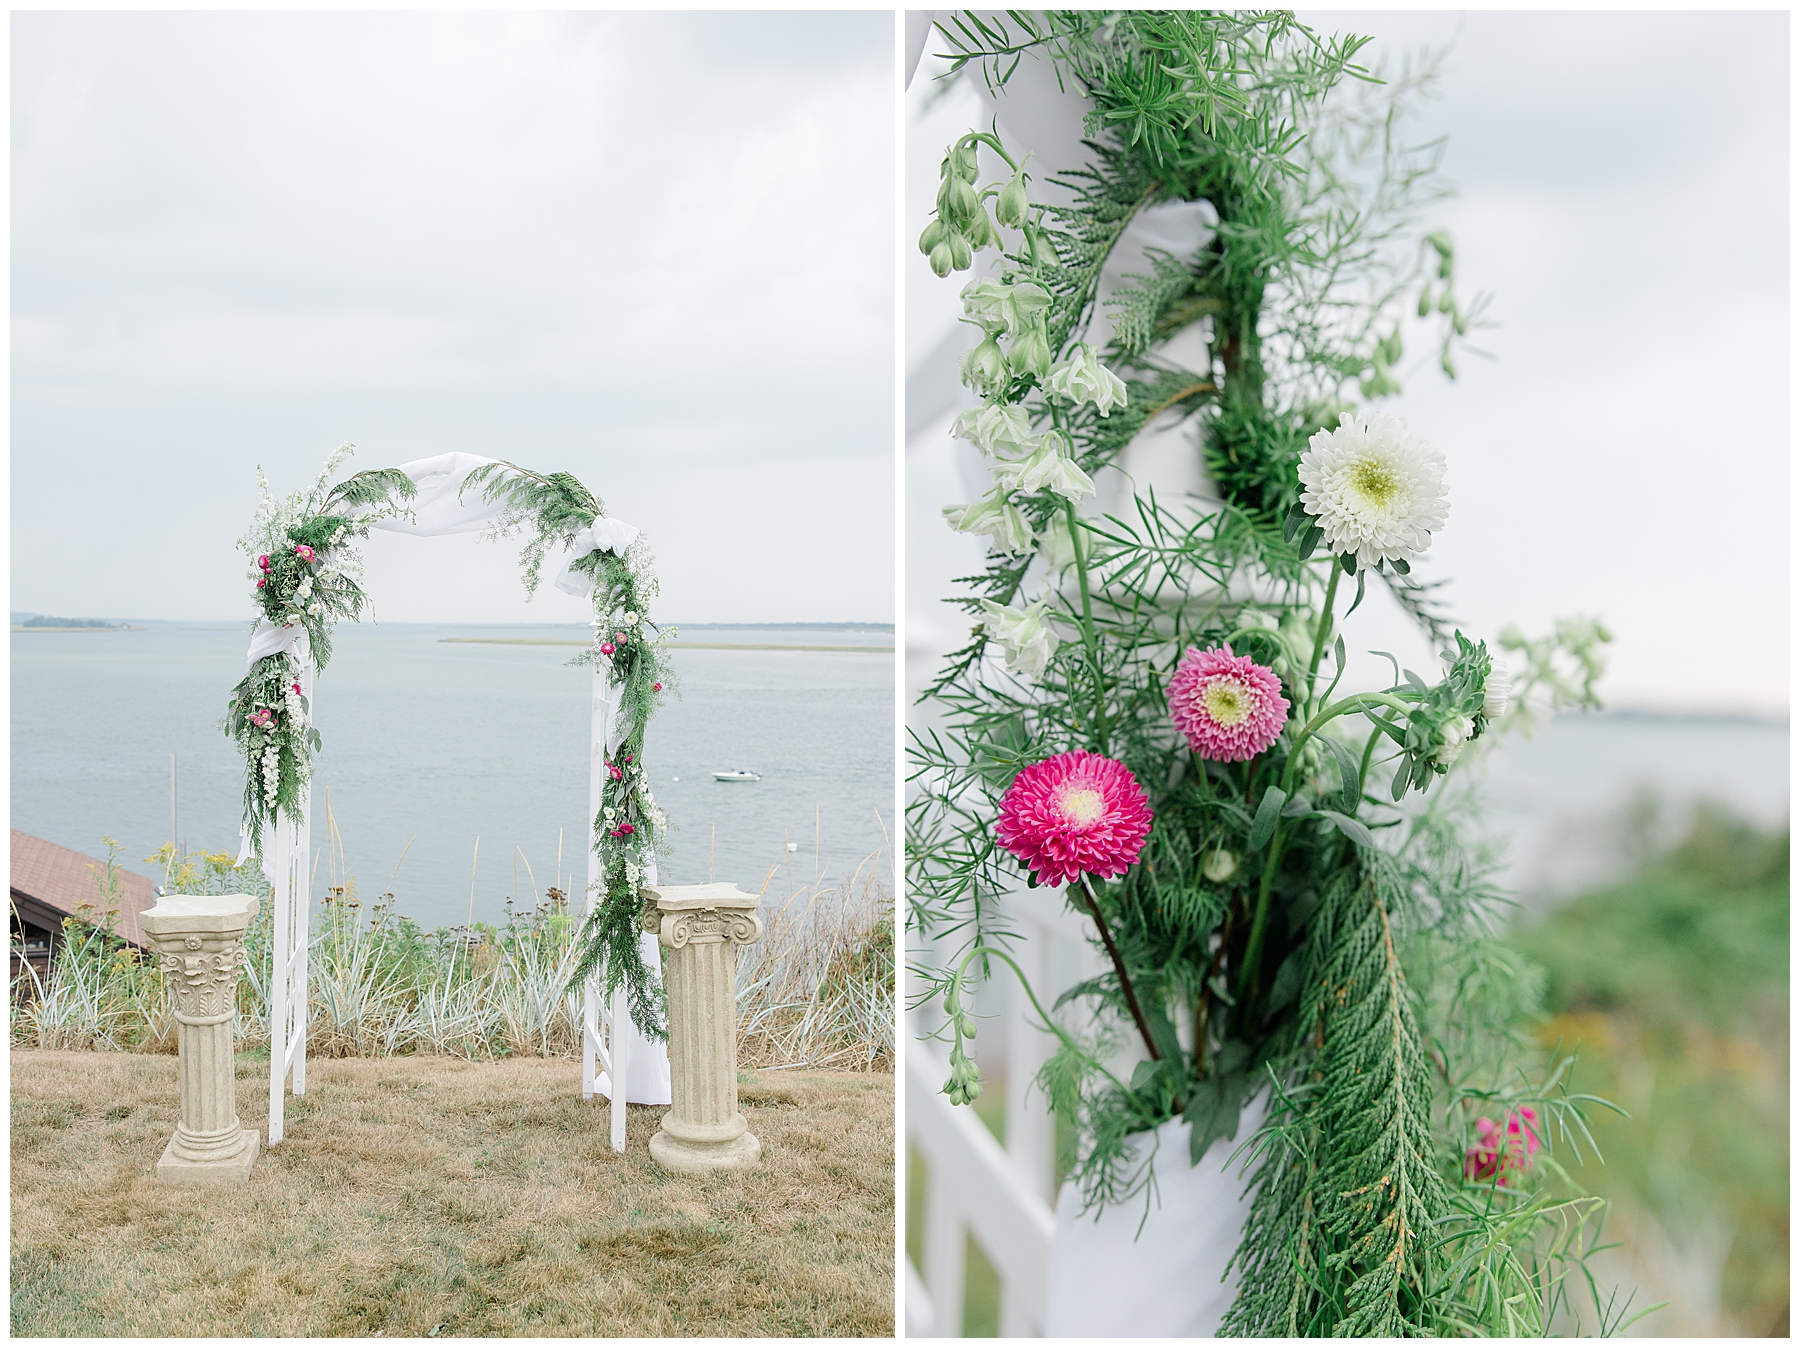 wedding arch decorated in flowers, greenery, and pine